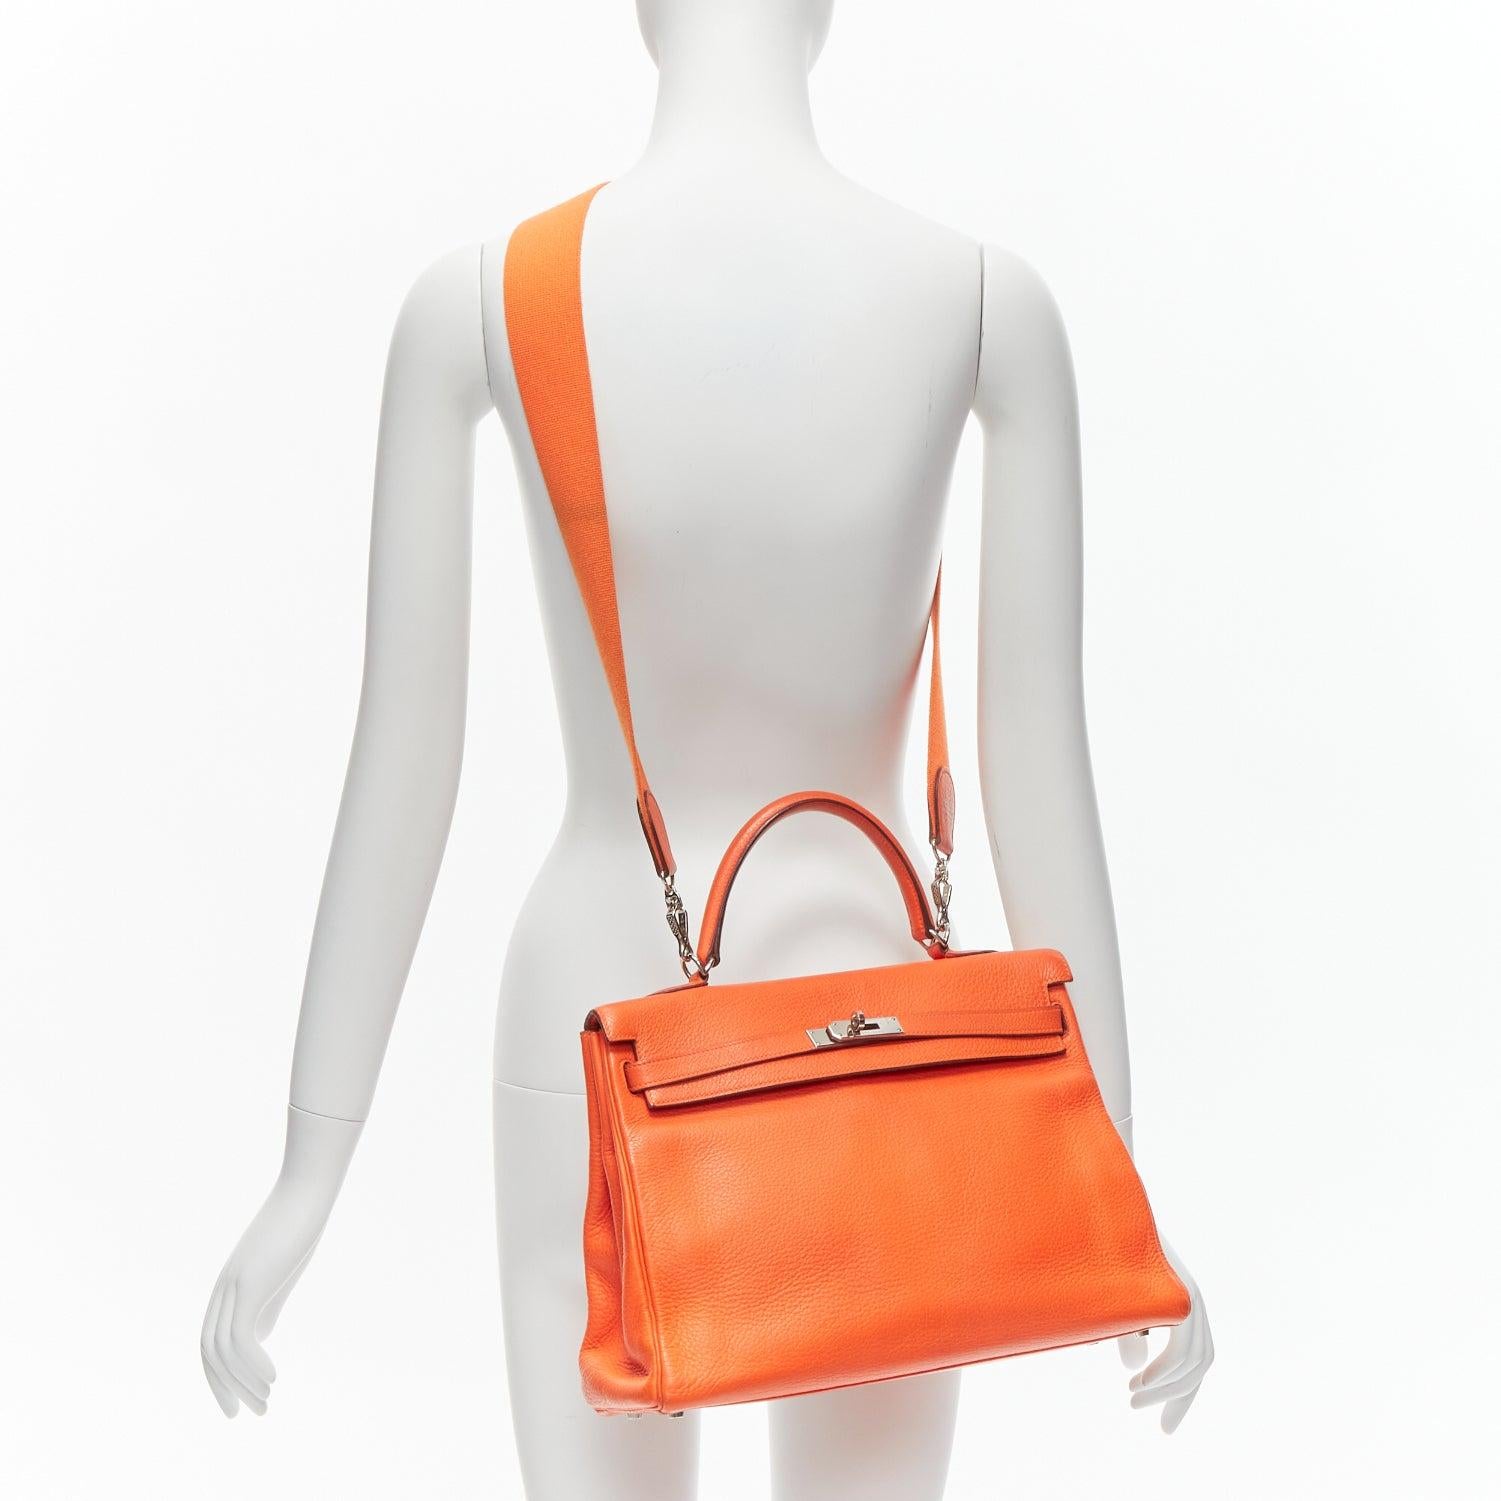 HERMES Kelly 32 PHW orange togo leather silver buckle top handle shoulder bag
Reference: GIYG/A00310
Brand: Hermes
Model: Kelly 32
Material: Leather
Color: Orange, Silver
Pattern: Solid
Closure: Turnlock
Lining: Orange Leather
Extra Details: With